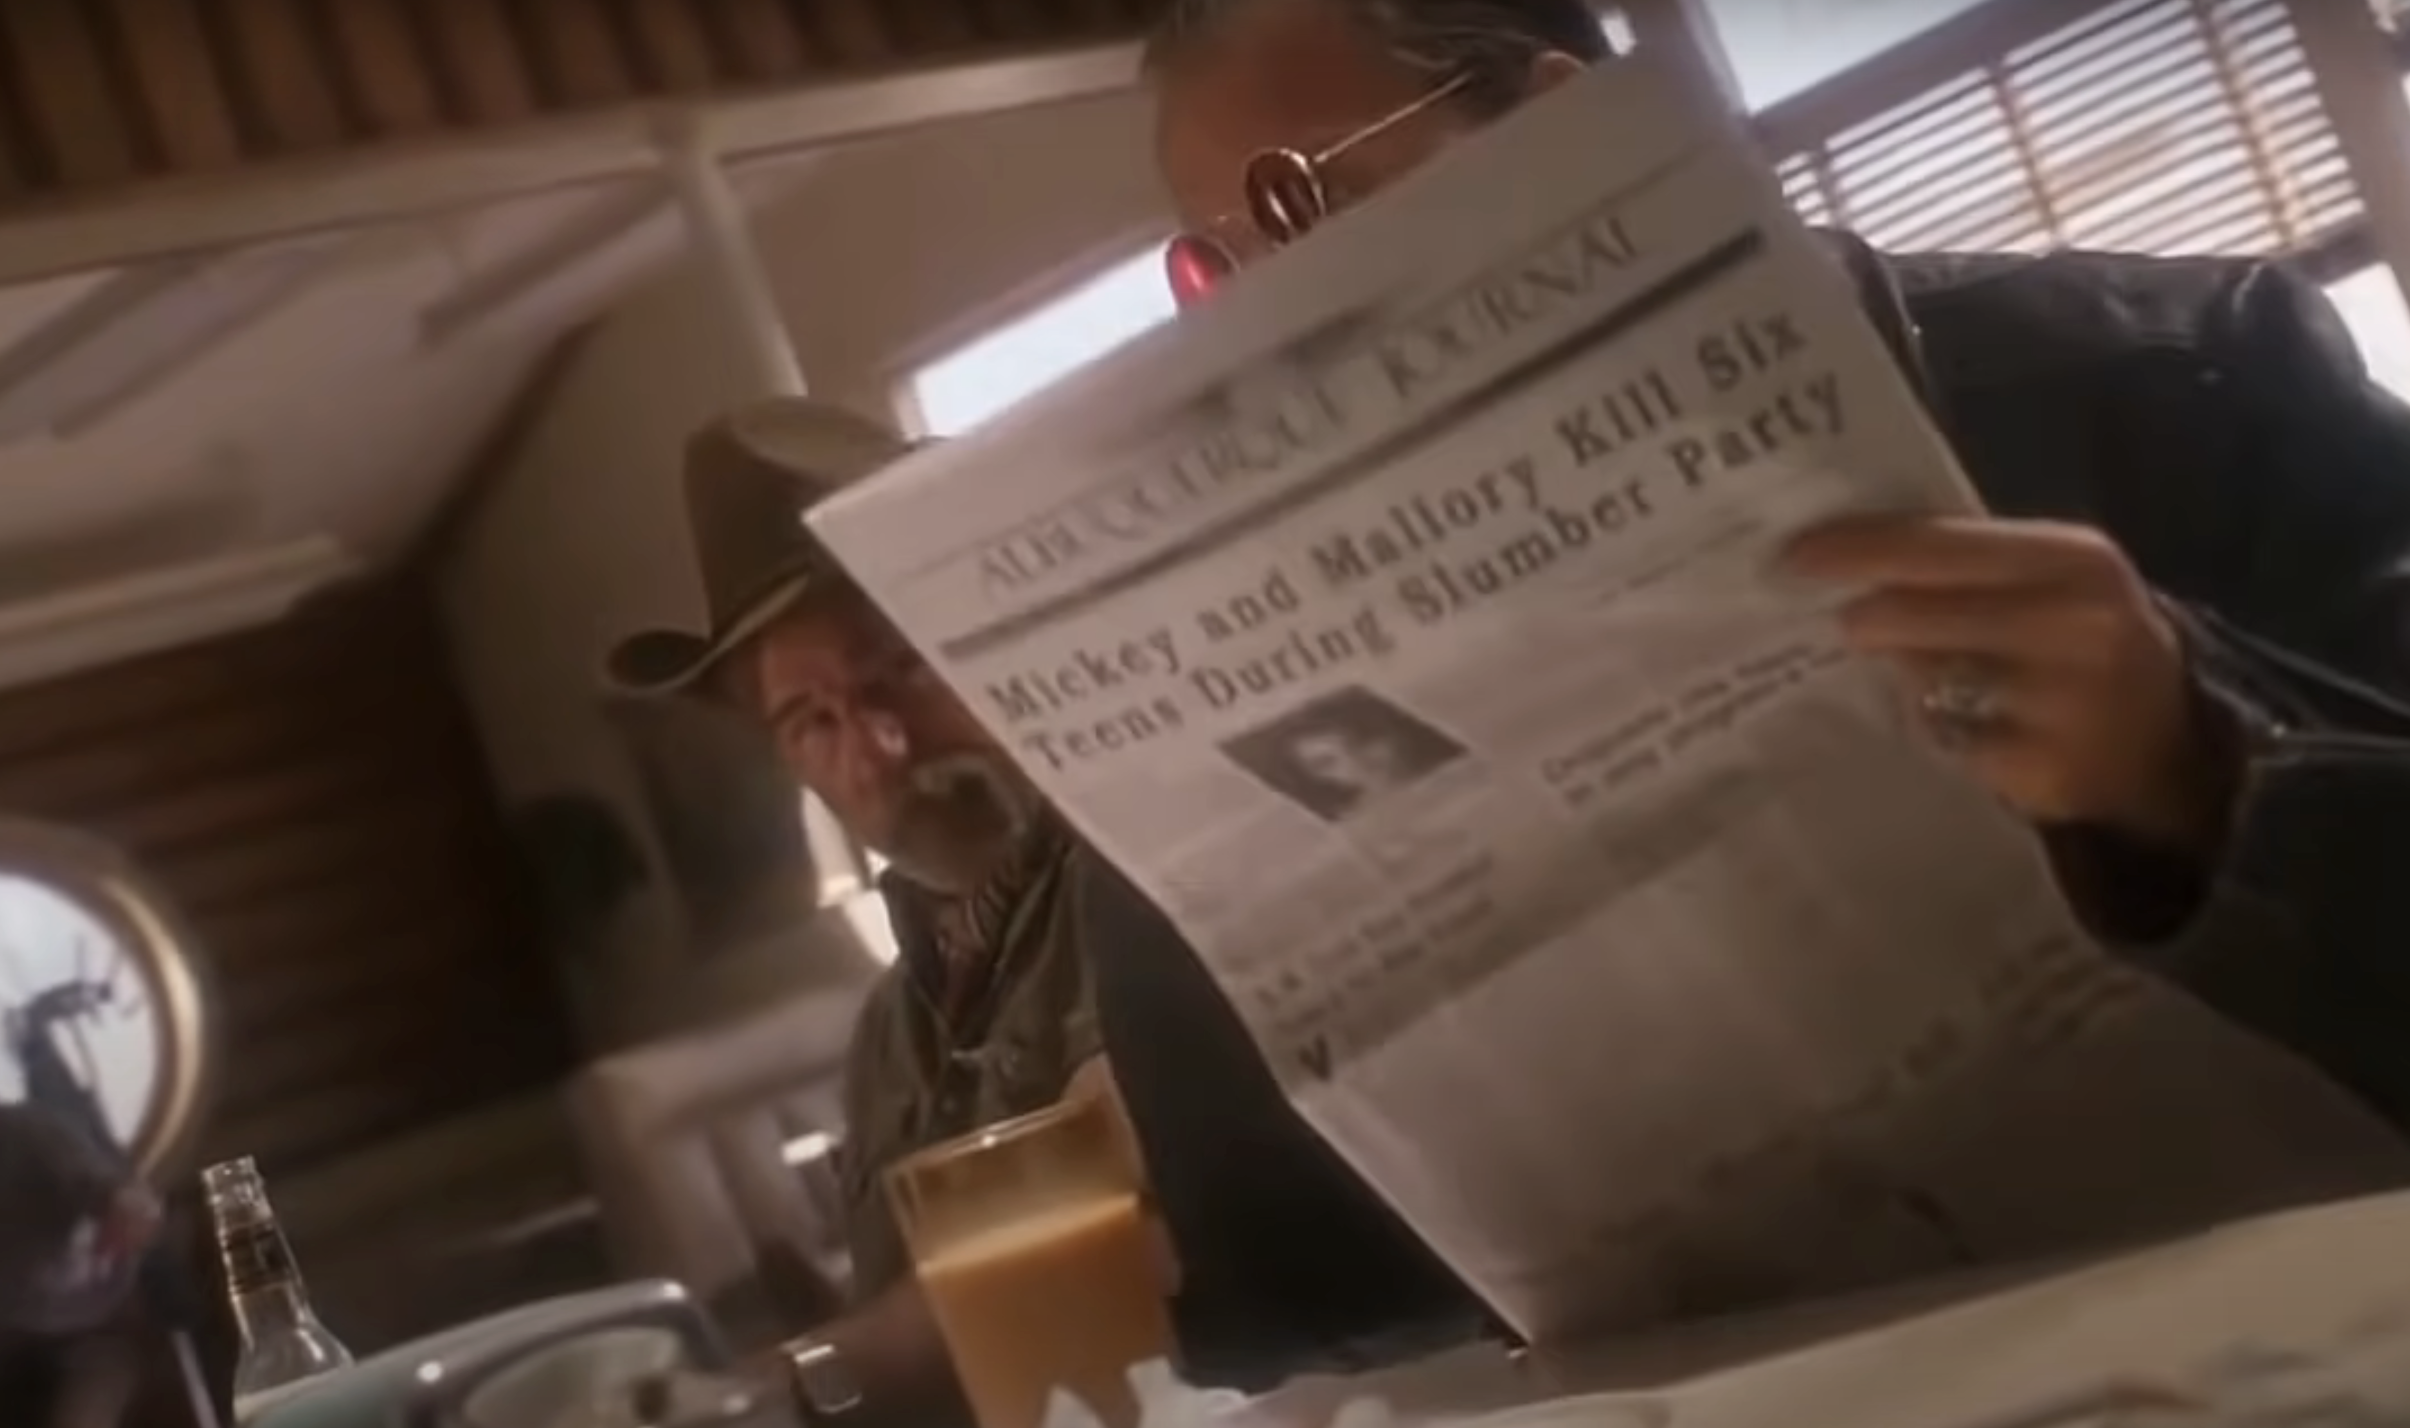 The diner patron holding up a newspaper